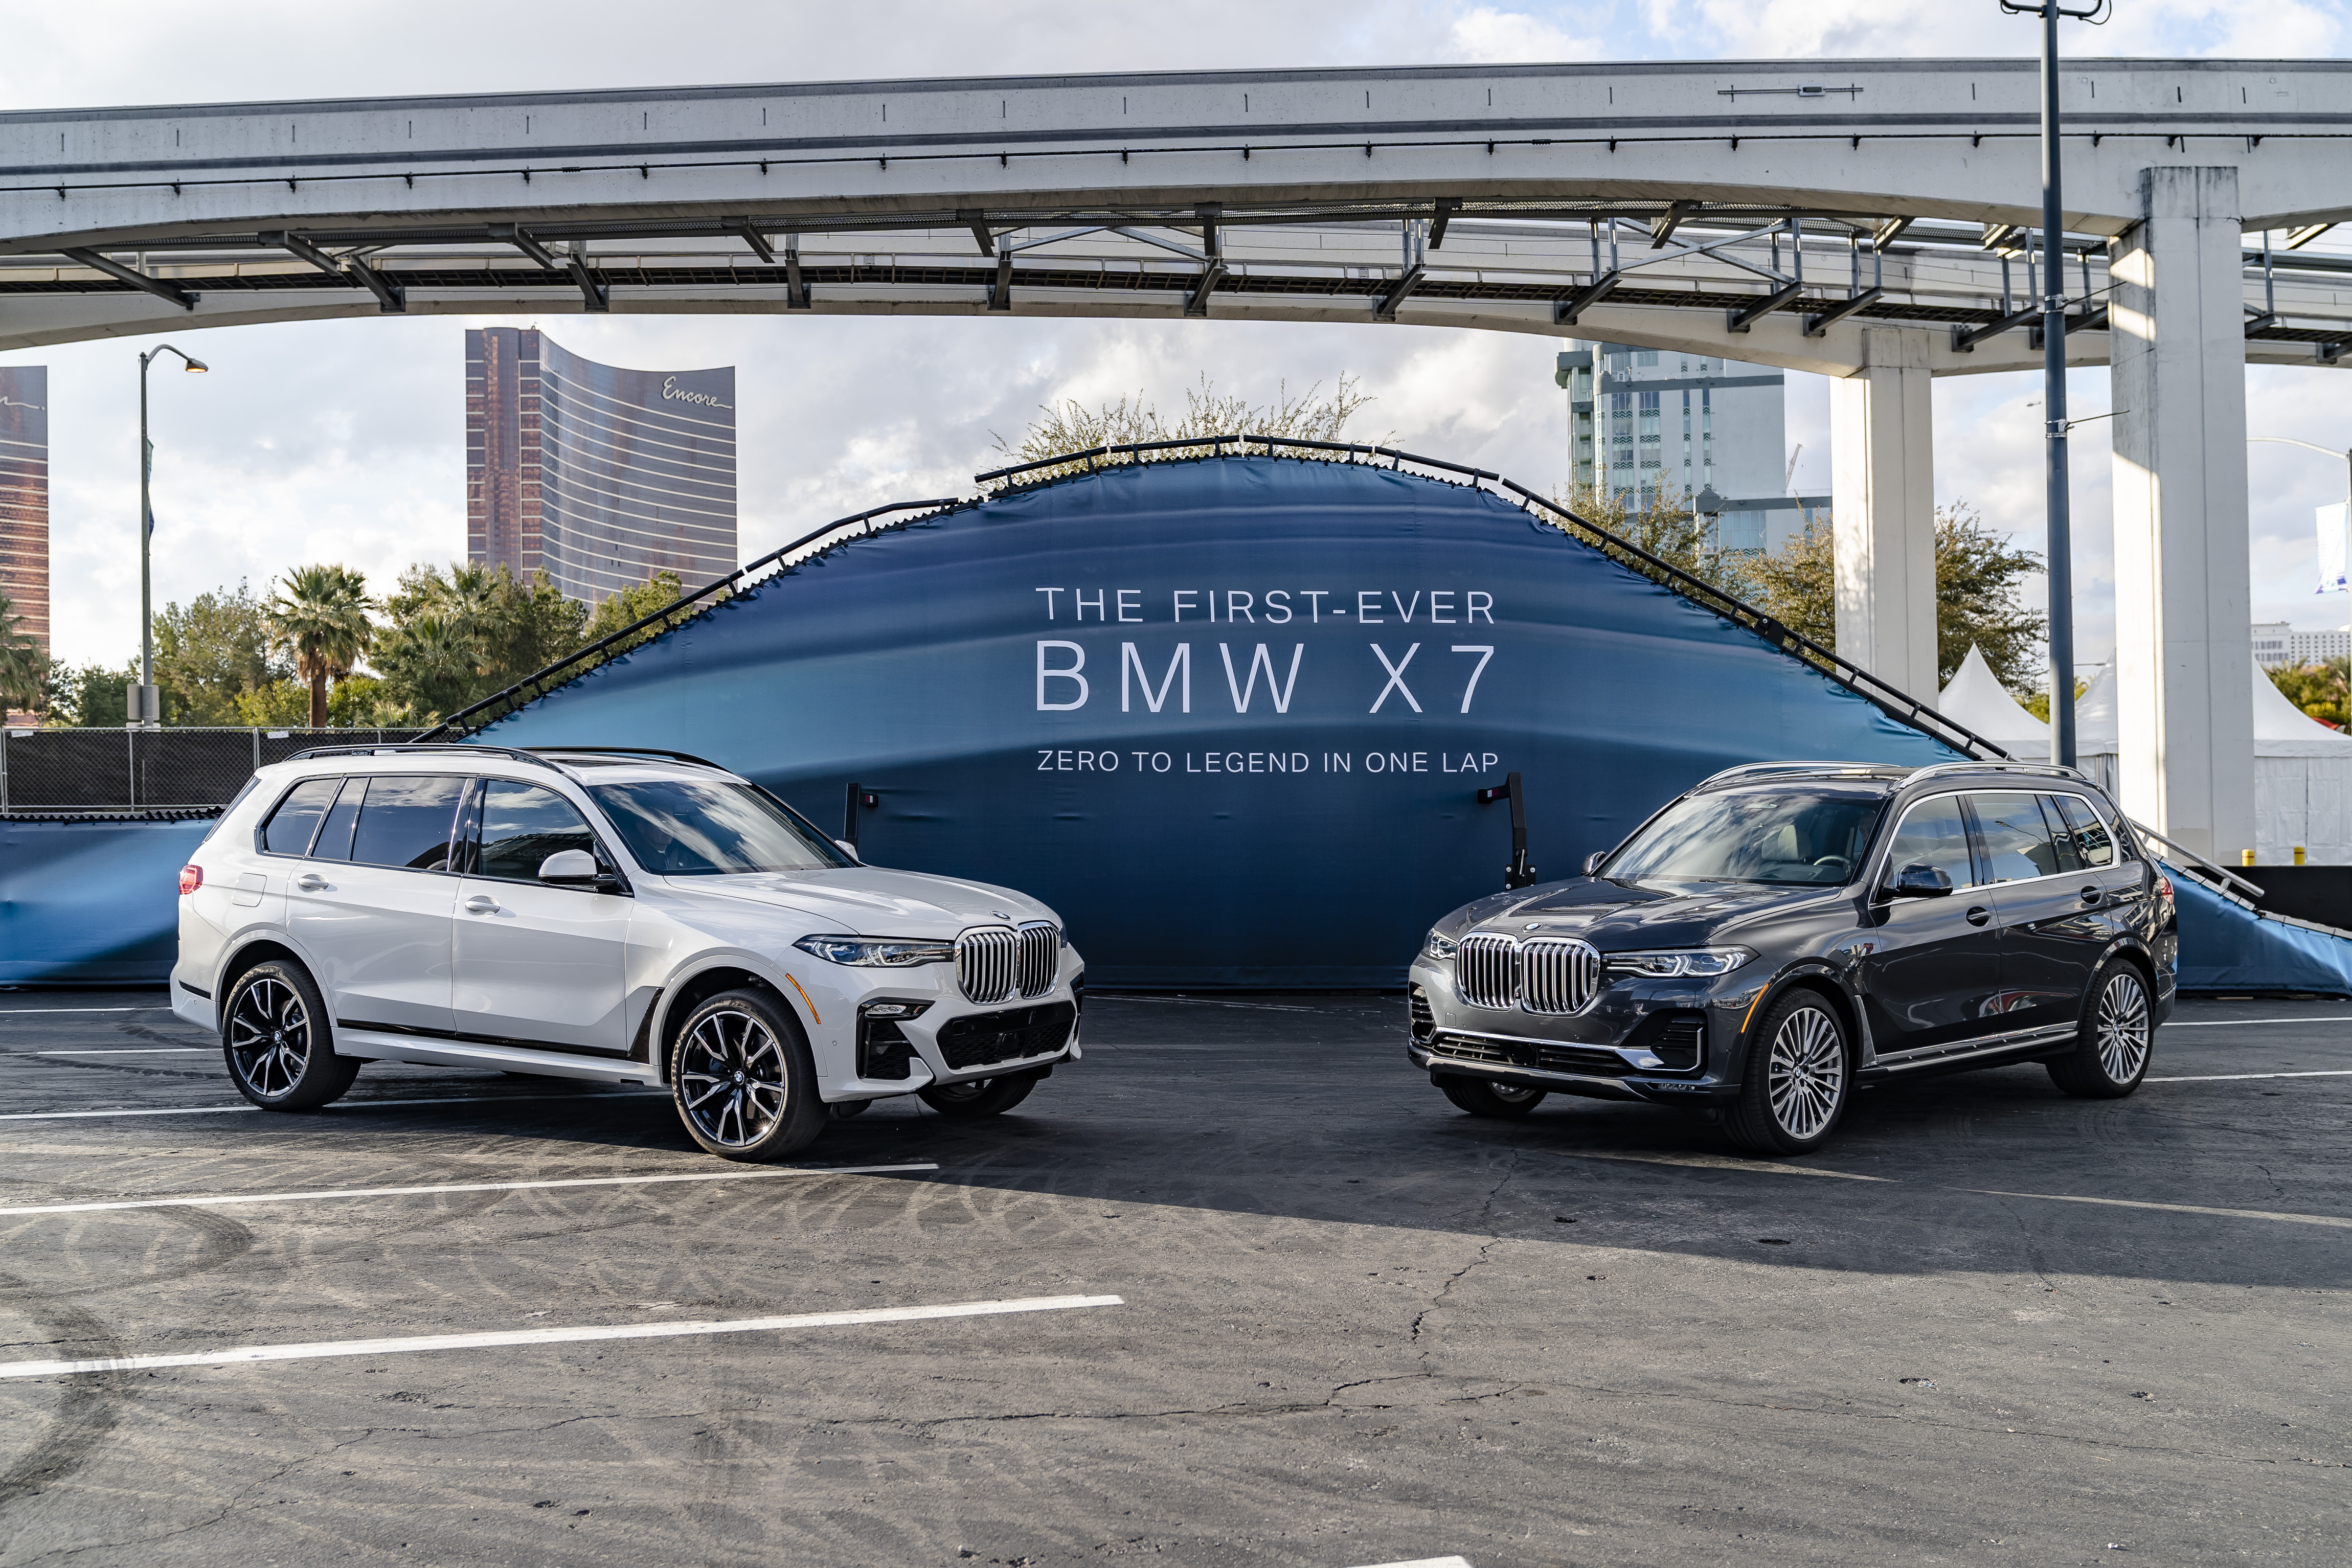 BMW Group @ CES 2019 – BMW X7 off-road experience